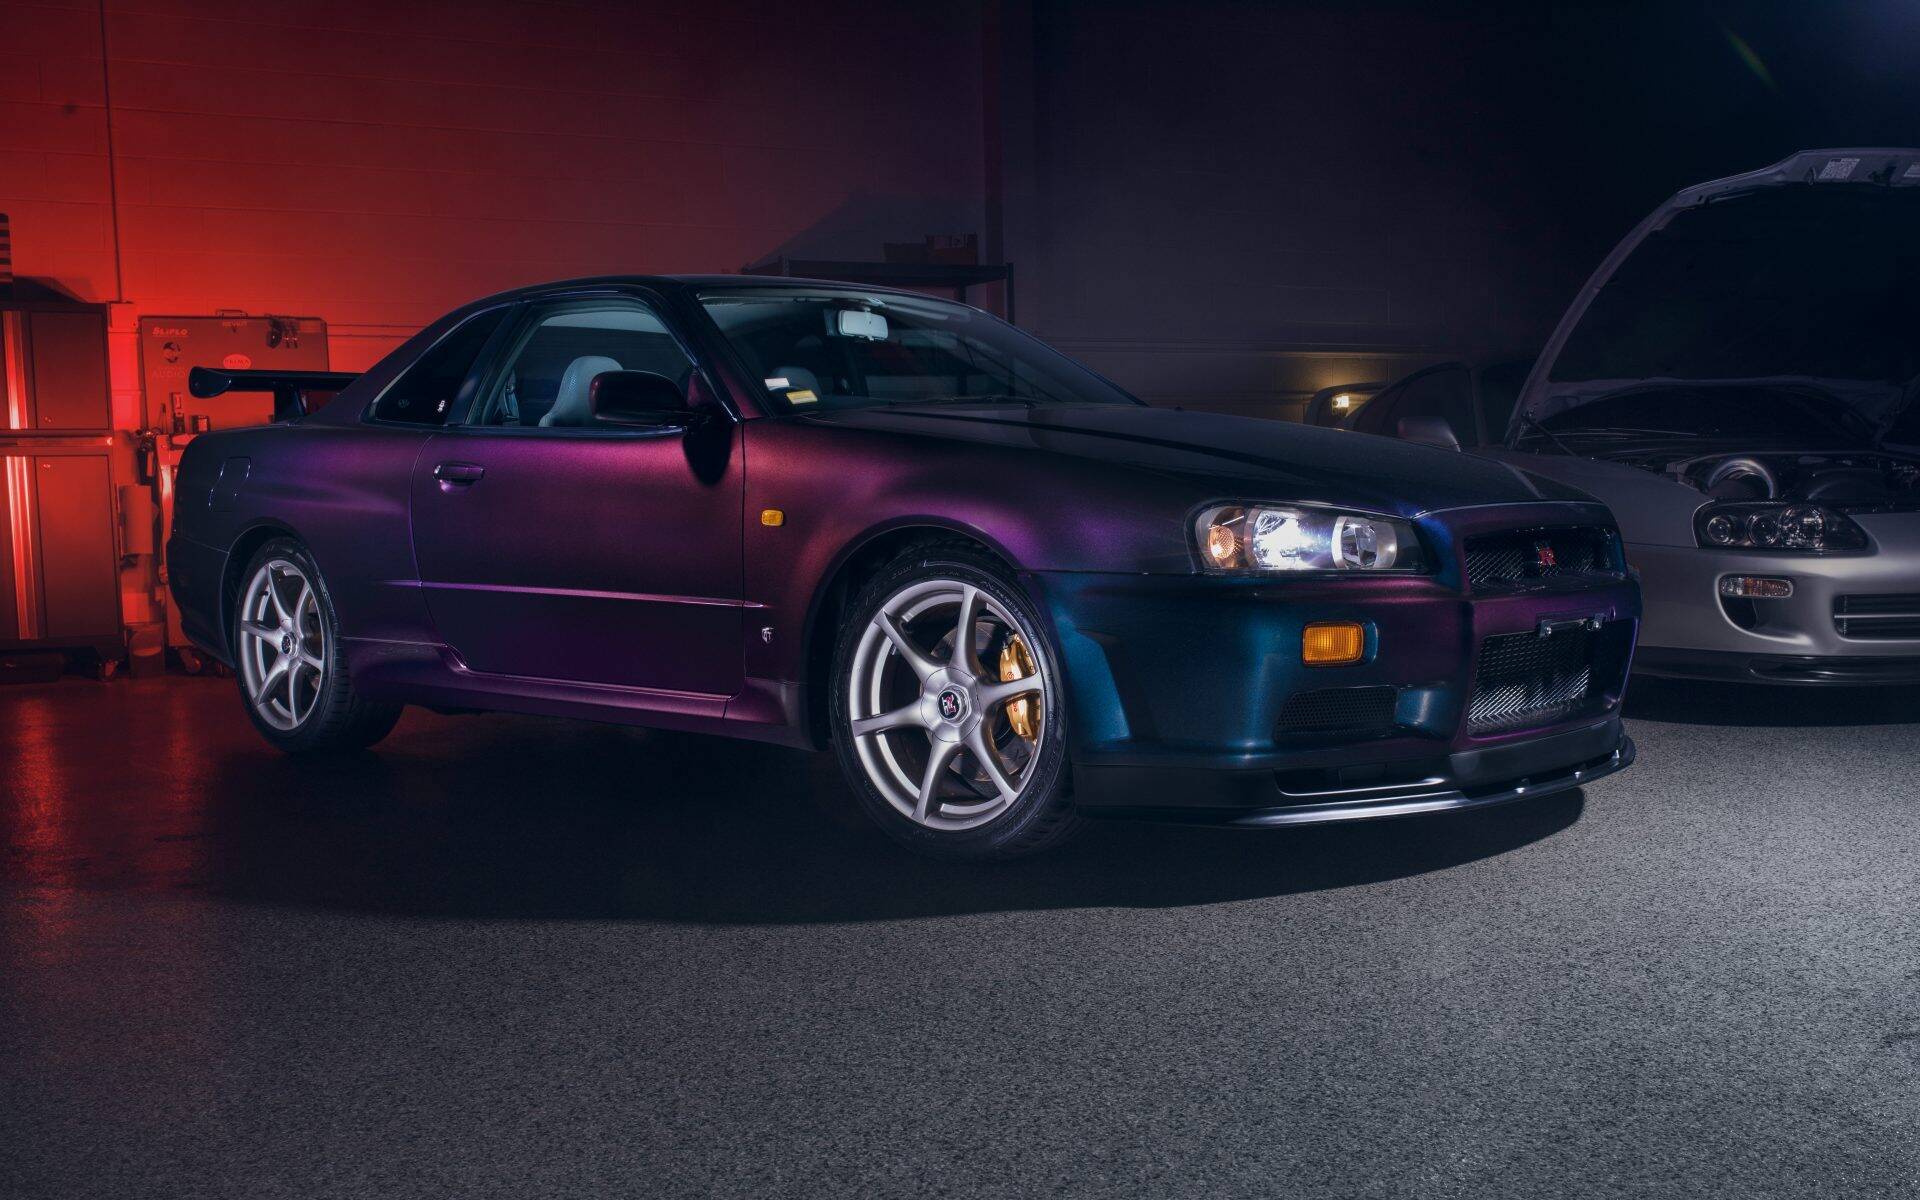 This Nissan Skyline GT-R Sold for Nearly $400,000 Looks Dreamy